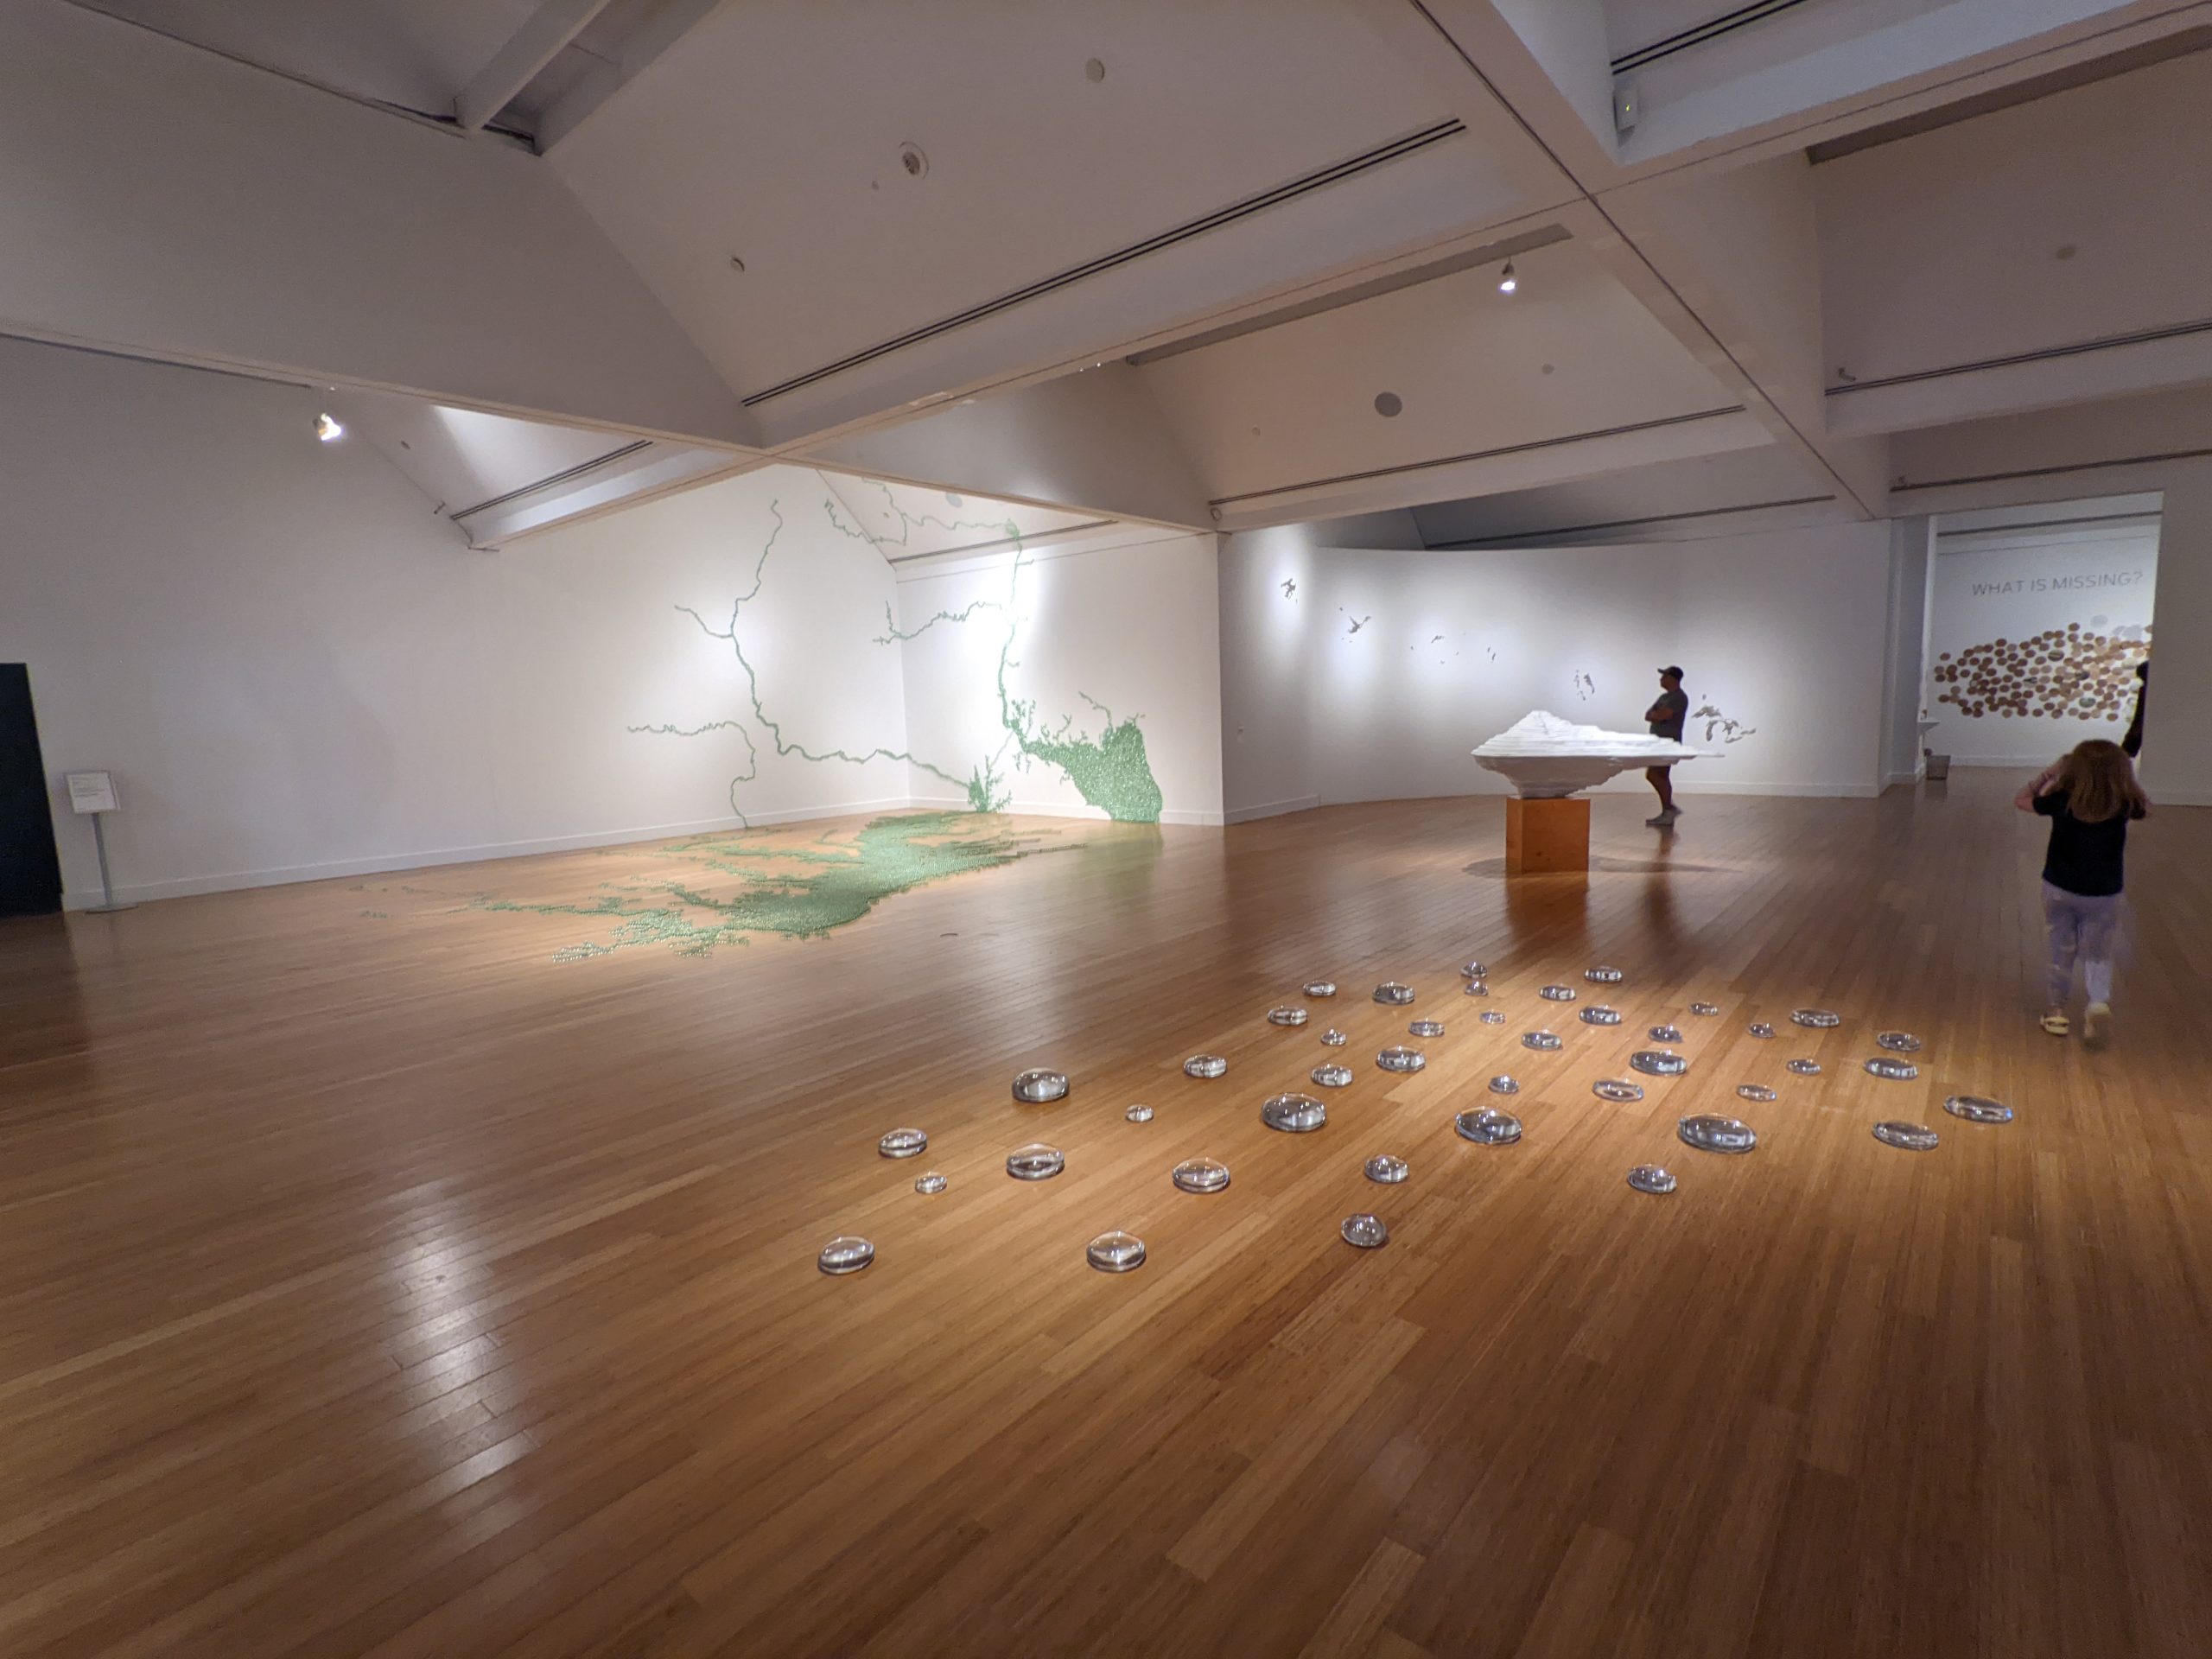 View of museum gallery interior, with several works of art installed. Through a doorway is visible the installation in fig. 1; to the left the installation in fig. 5, and in the center some bubble-shaped forms set directly on the hardwood floor, as well as a white iceberg-shaped sculpture on a pedestal.